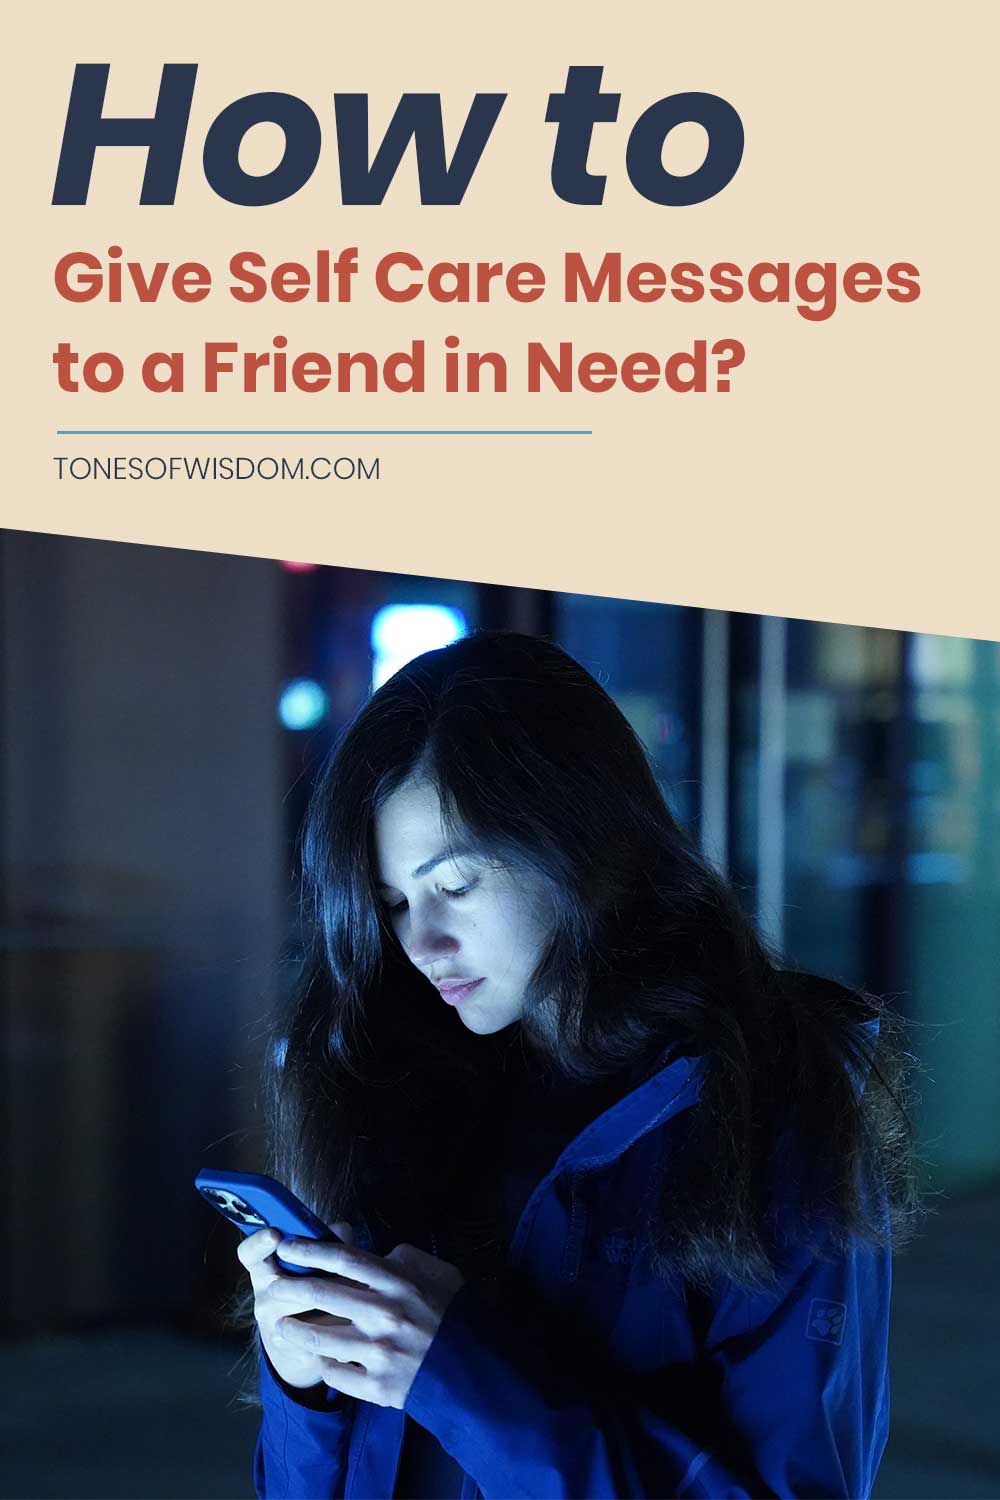 Girl texting at night - How to Give Self Care Messages to a Friend in Need?